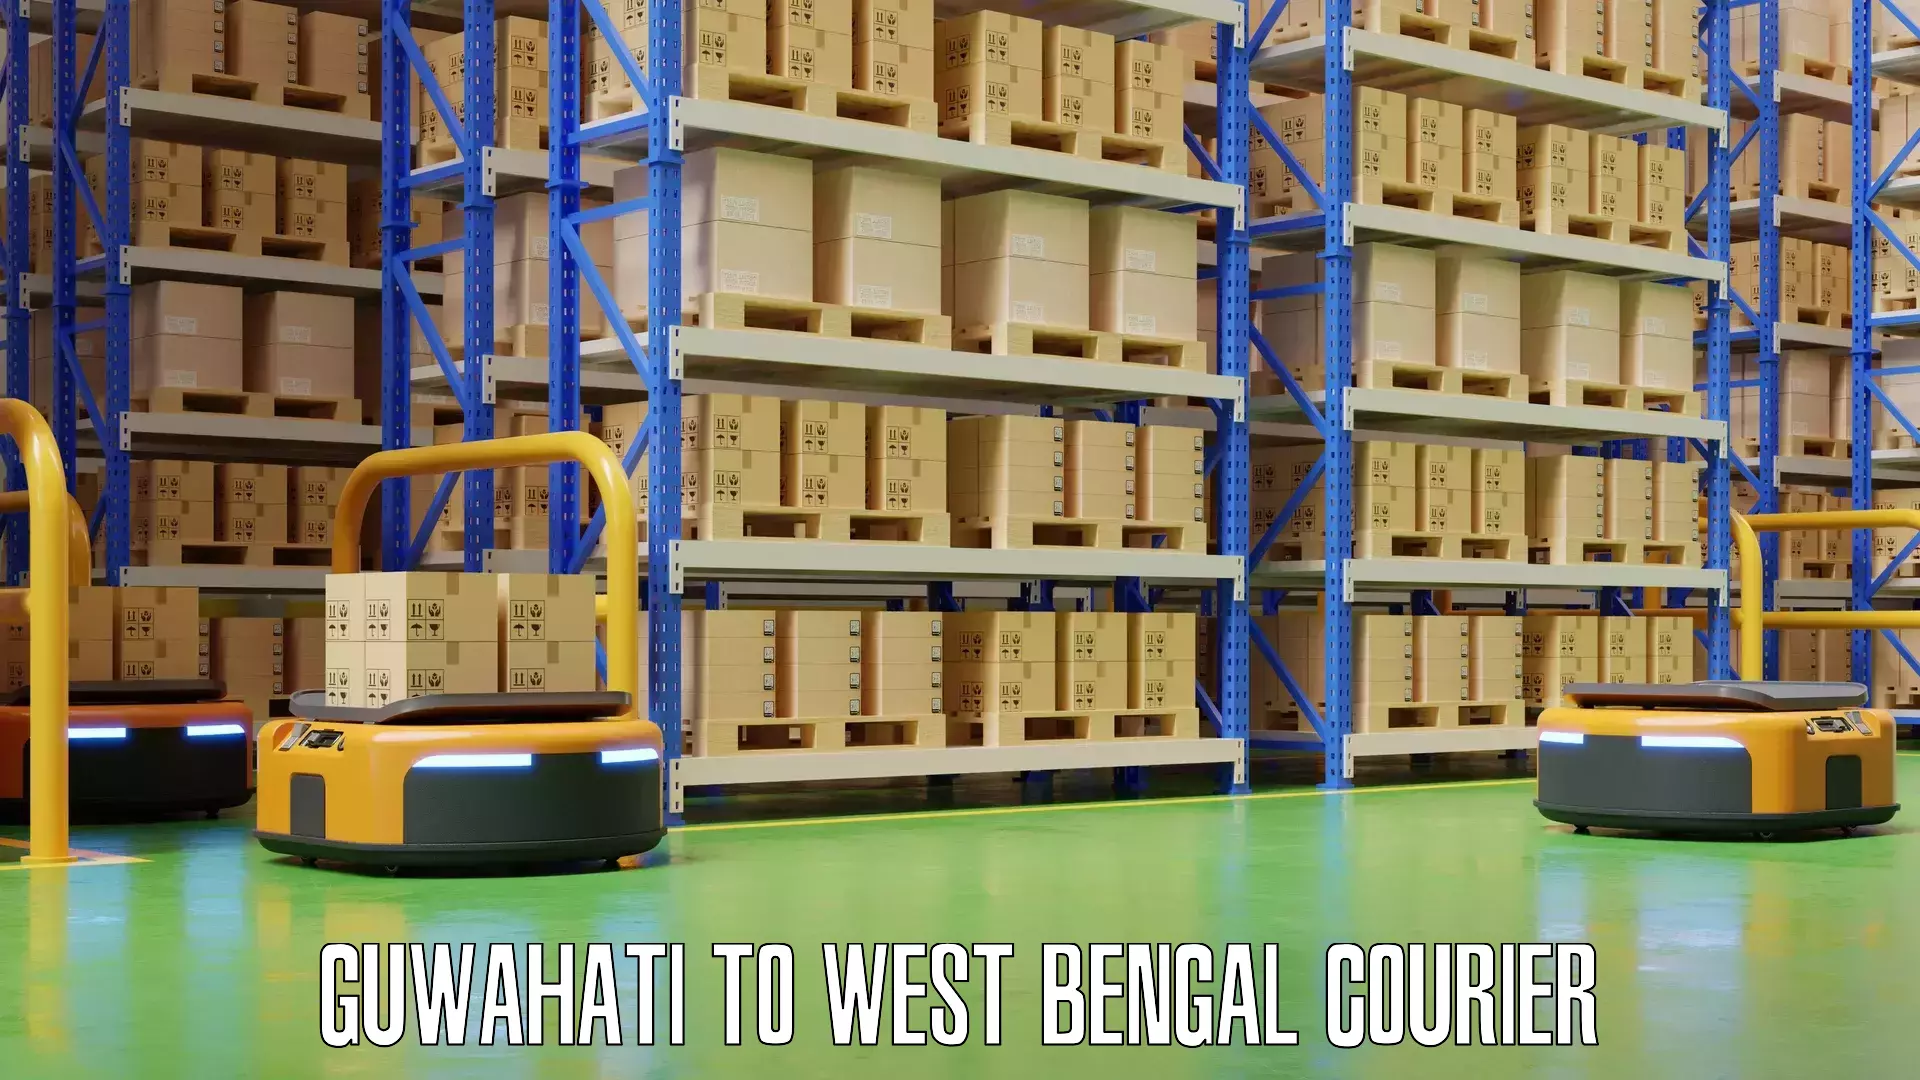 Luggage shipment specialists Guwahati to West Bengal